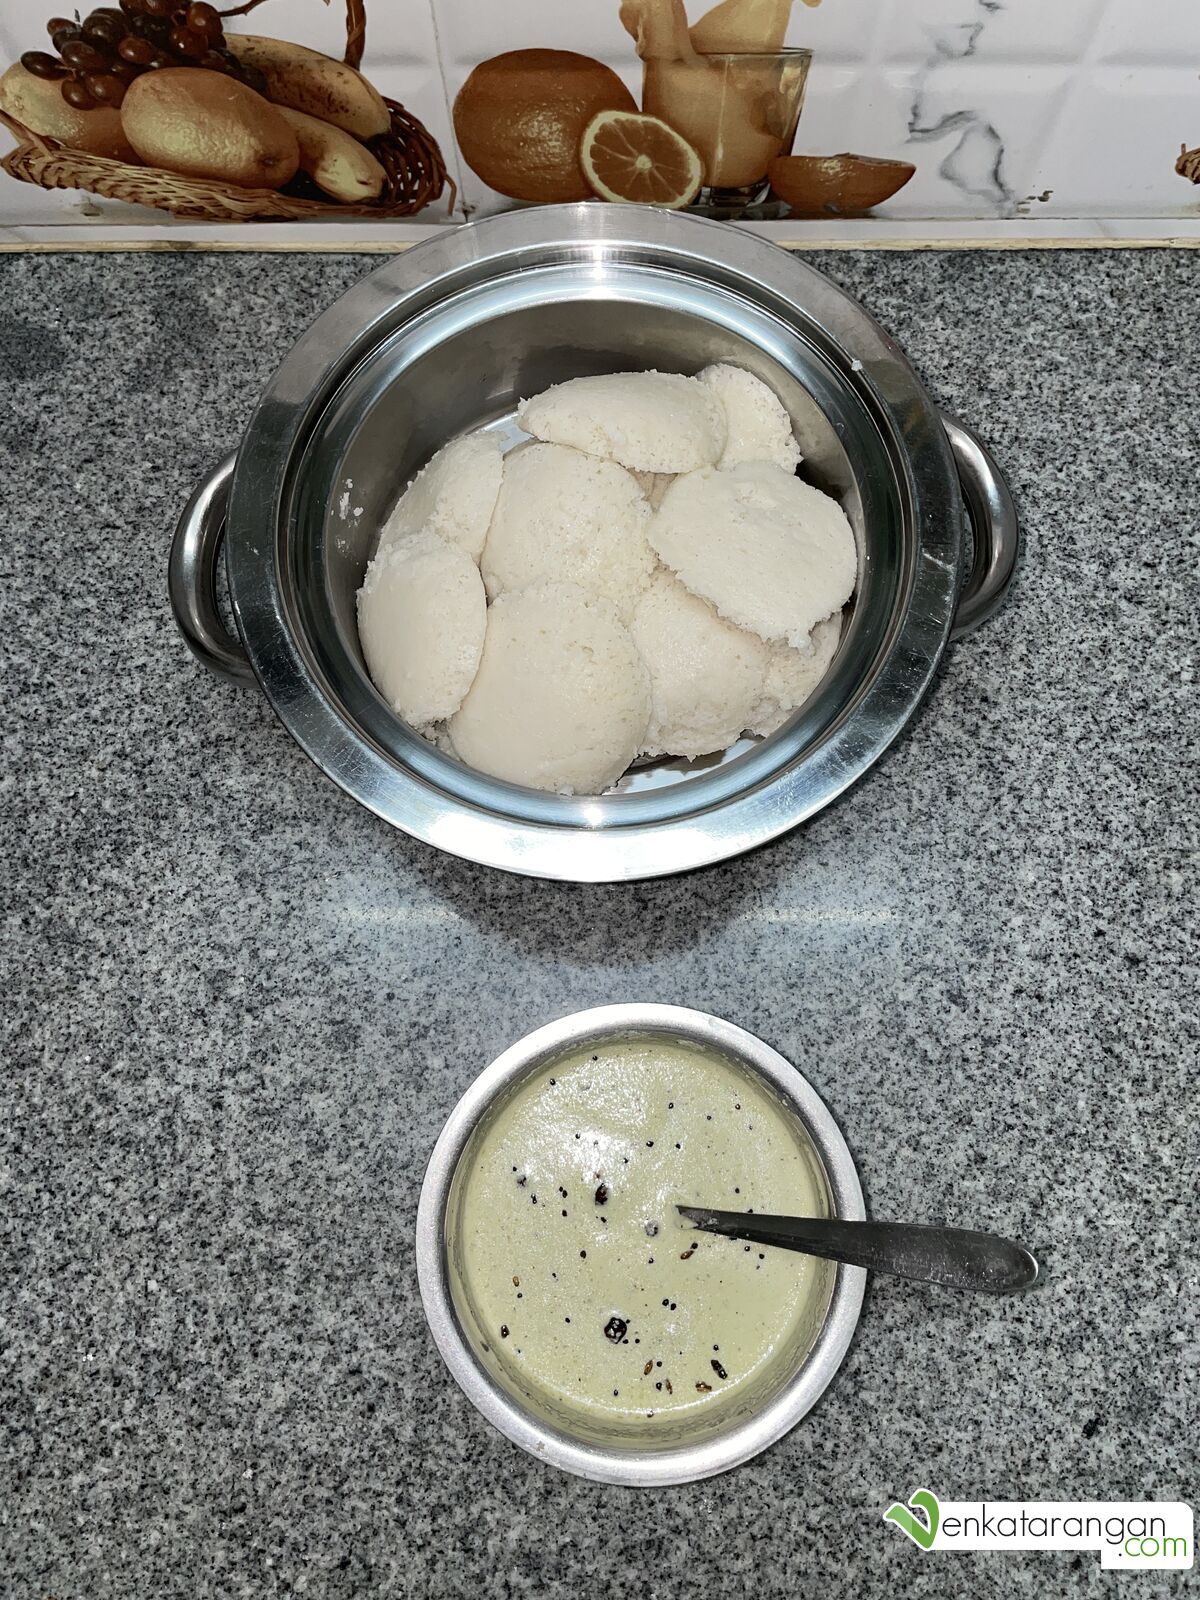 Piping hot homemade Idlis paired with coconut chutney, may be the food served in heaven for breakfast.